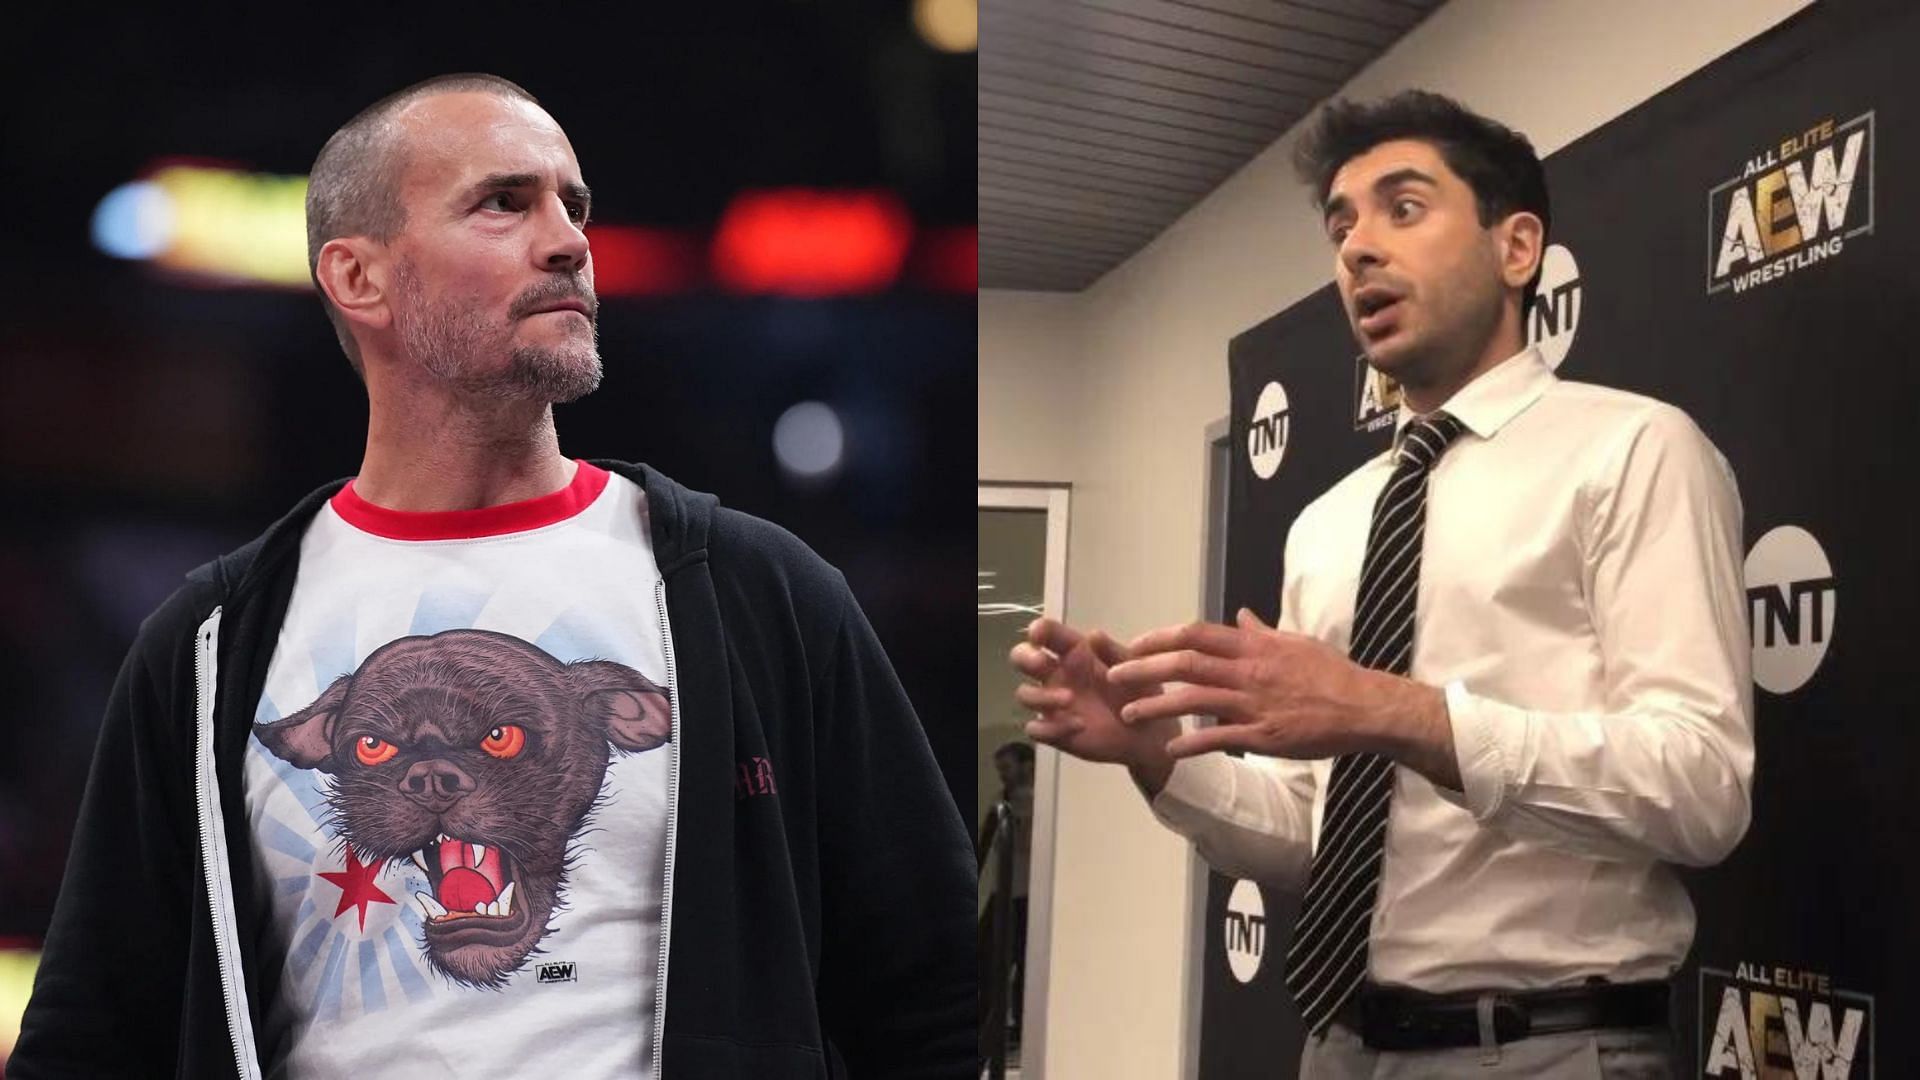 CM Punk and Tony Khan are key members of All Elite Wrestling